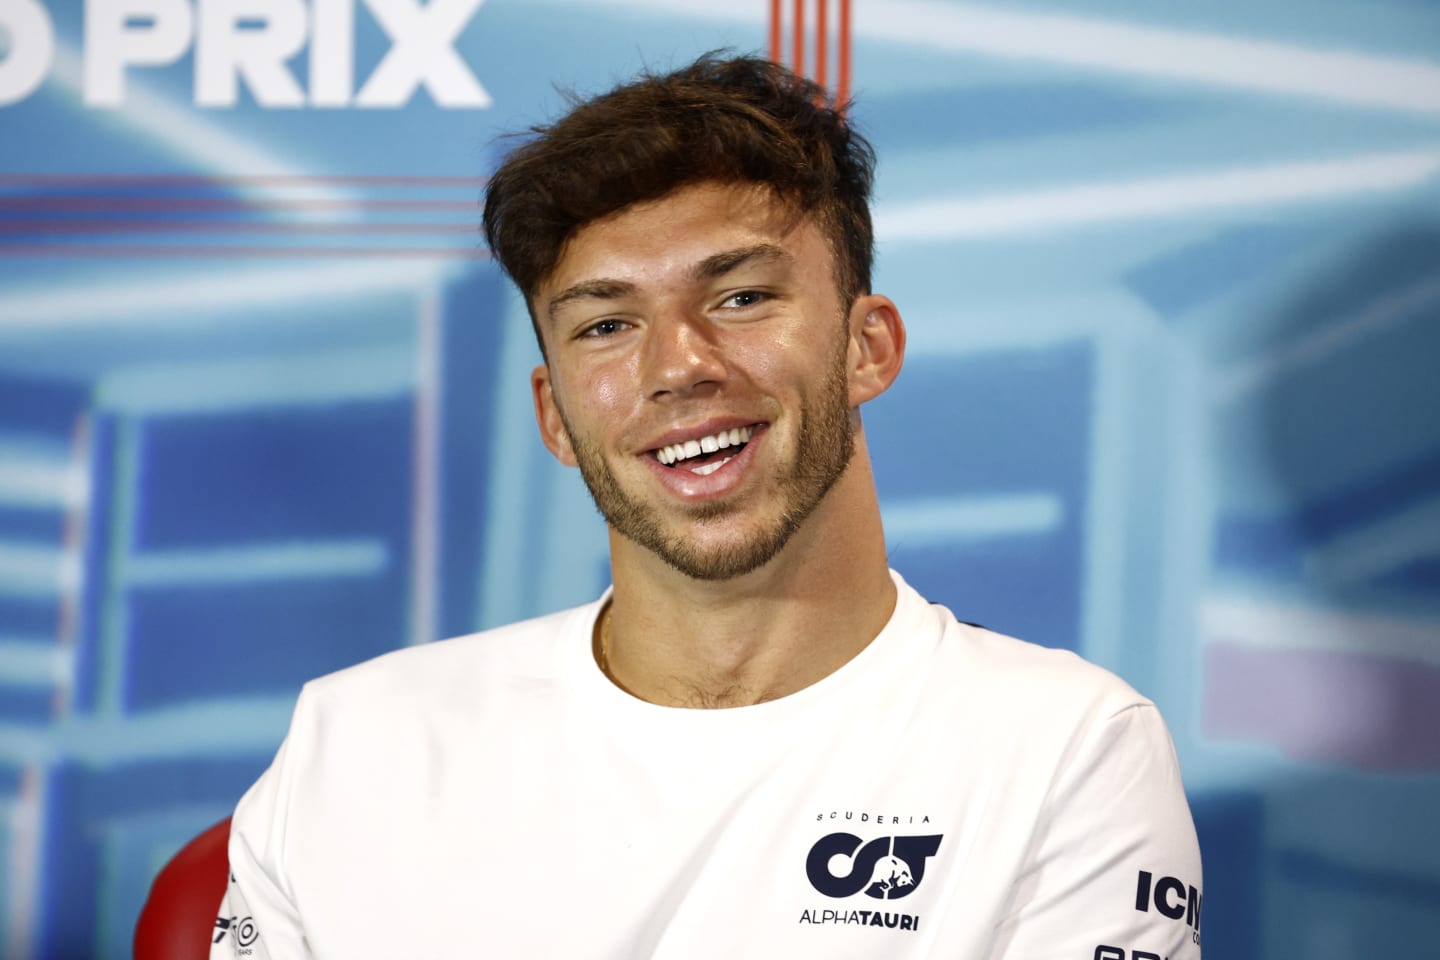 MIAMI, FLORIDA - MAY 06: Pierre Gasly of France and Scuderia AlphaTauri talks in the Drivers Press Conference prior to practice ahead of the F1 Grand Prix of Miami at the Miami International Autodrome on May 06, 2022 in Miami, Florida. (Photo by Jared C. Tilton/Getty Images)